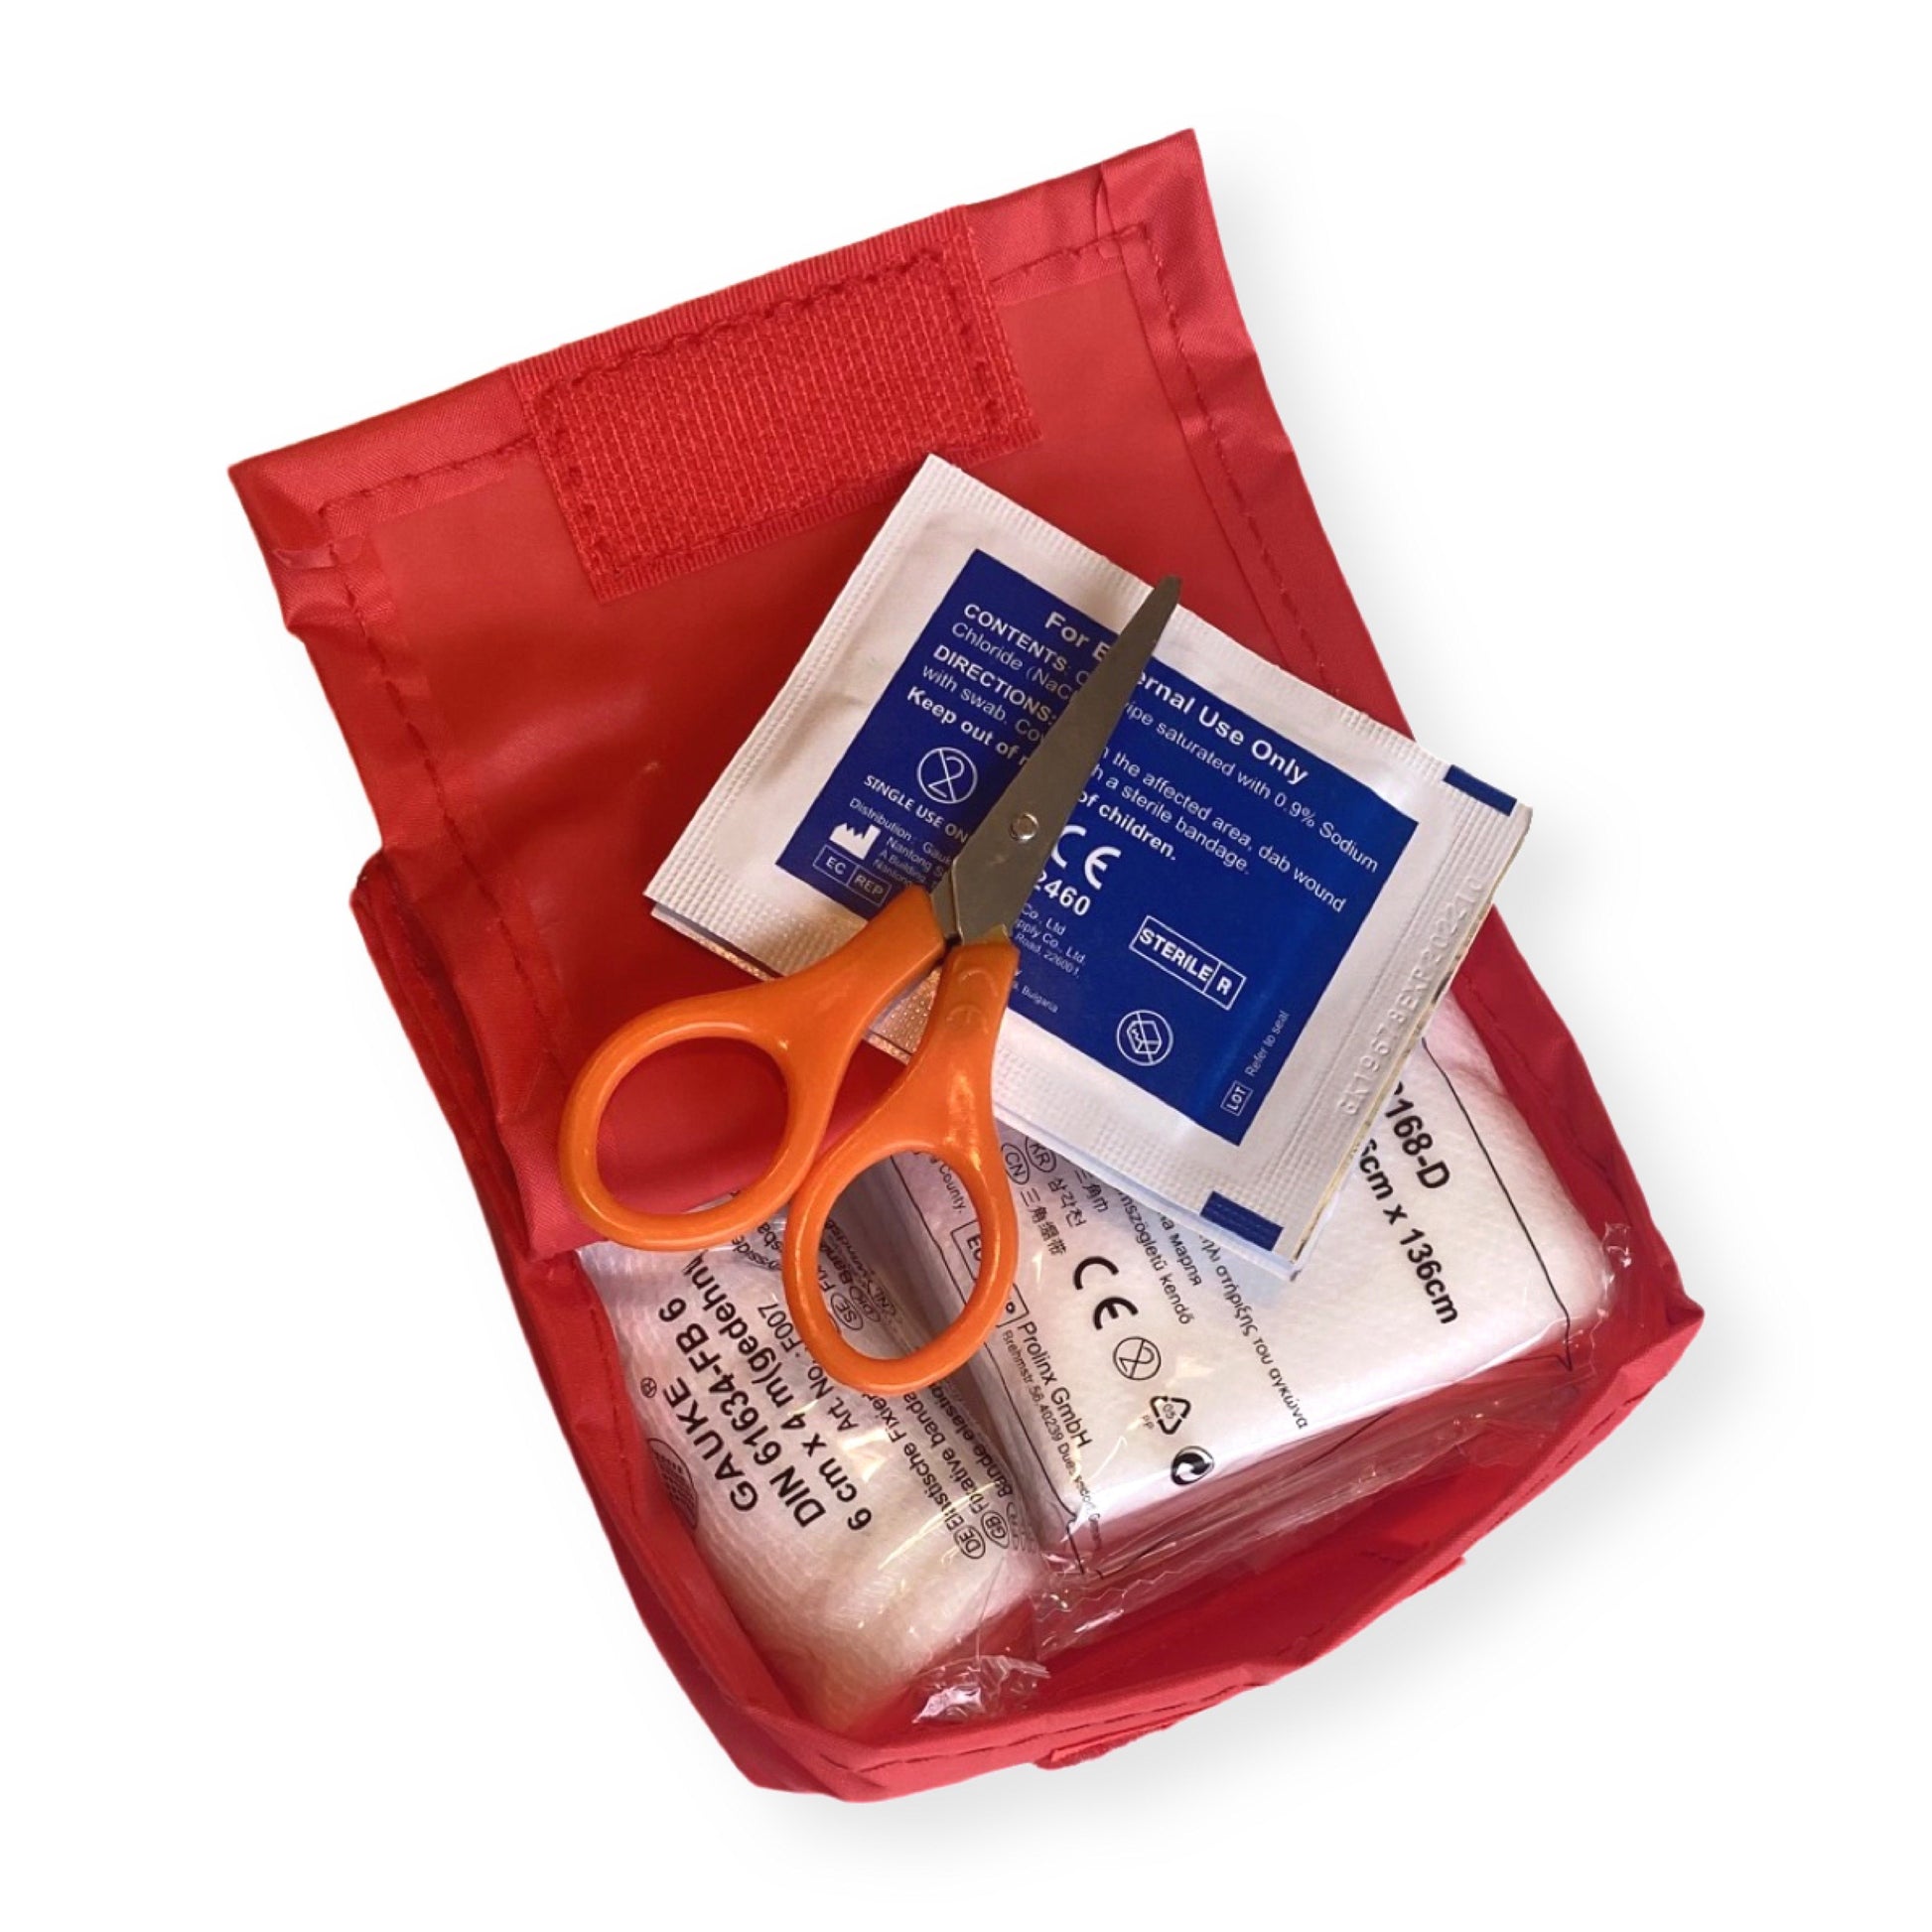 First Aid Kit: small 1st aid kit for travel and touring. Emergency mini first aid kit for minor medial emergencies. This mini first aid kit is stored in a lightweight, compact carry case. Great for people on the move and ideal for treating minor injuries.